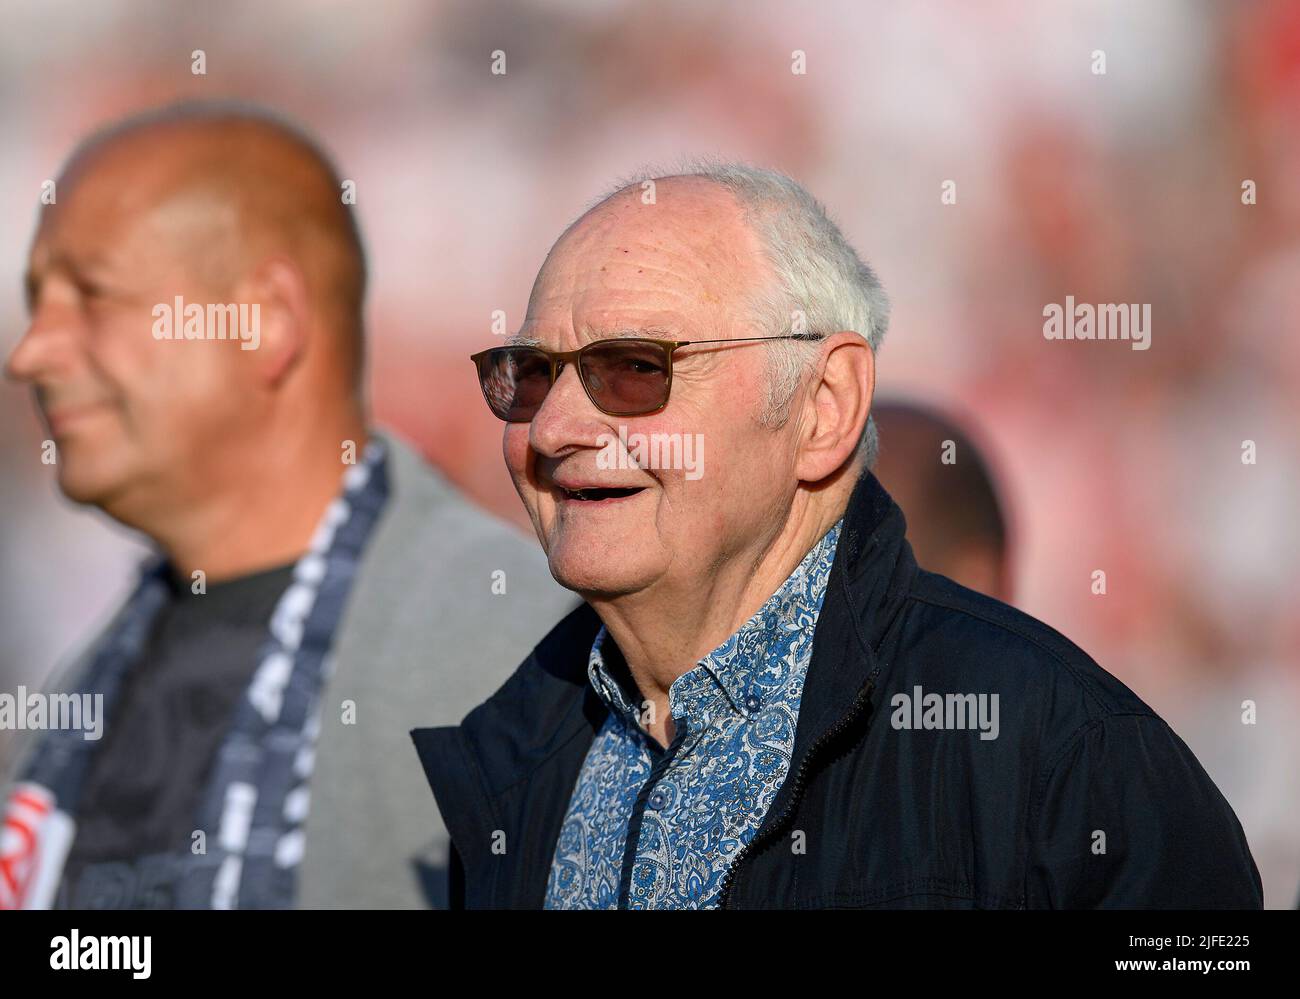 Willi "Ente" LIPPENS (former soccer player) Soccer test match Rot-Weiss Essen (E) - Borussia Monchengladbach (MG) 2: 4, on July 1st, 2022 in Essen/Germany. Â Credit: dpa picture alliance/Alamy Live News Stock Photo